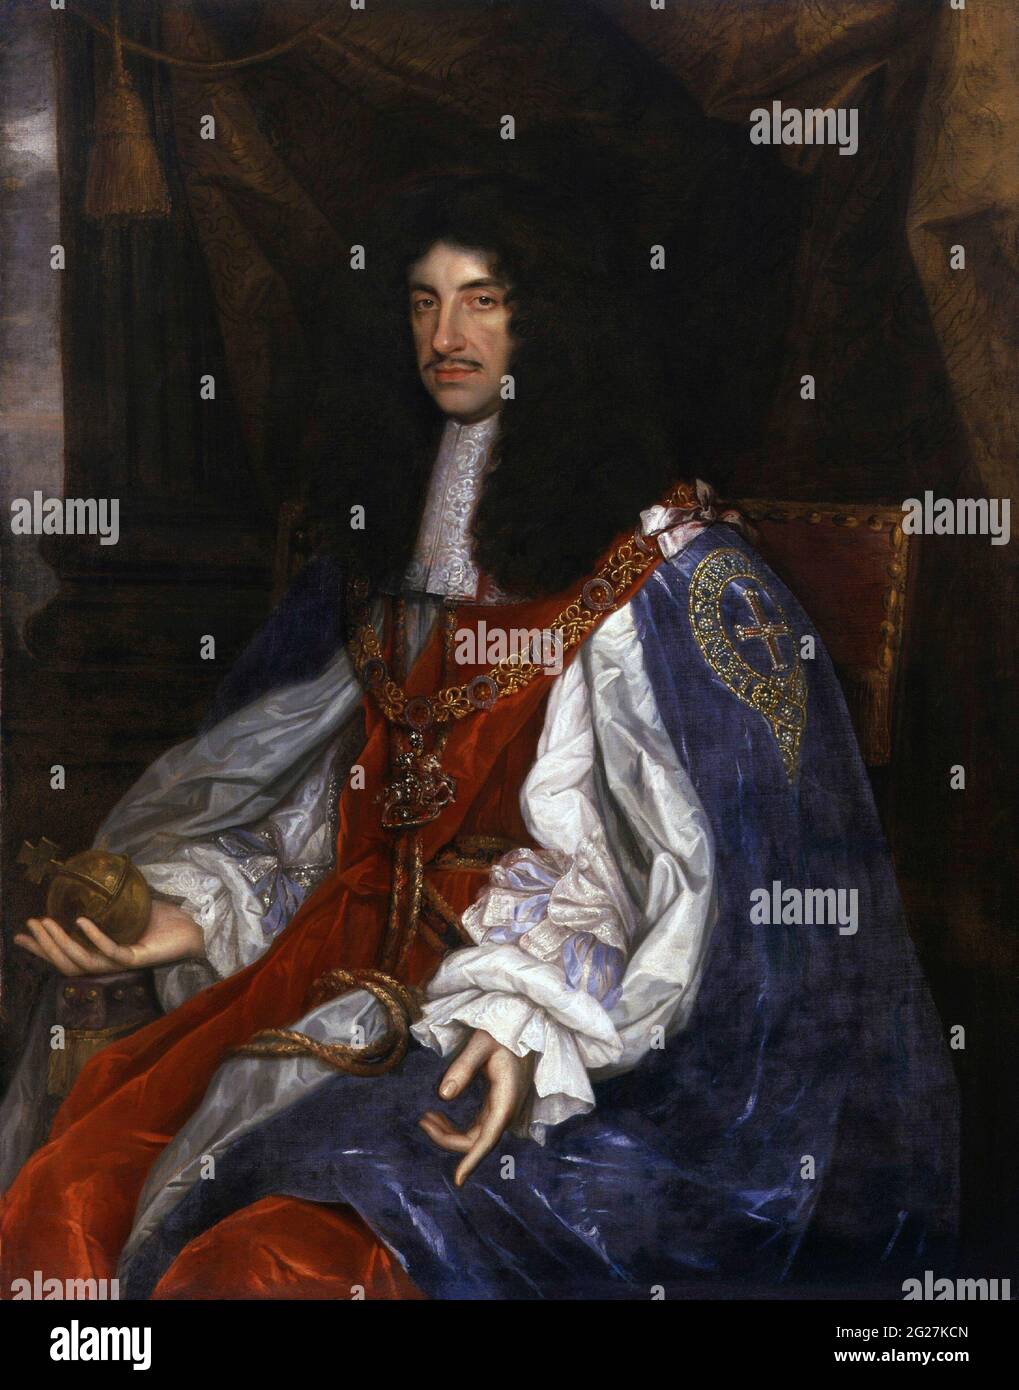 Painting of King Charles II dressed in garter robes when he was the ruling monarch of England, Scotland and Ireland. Stock Photo